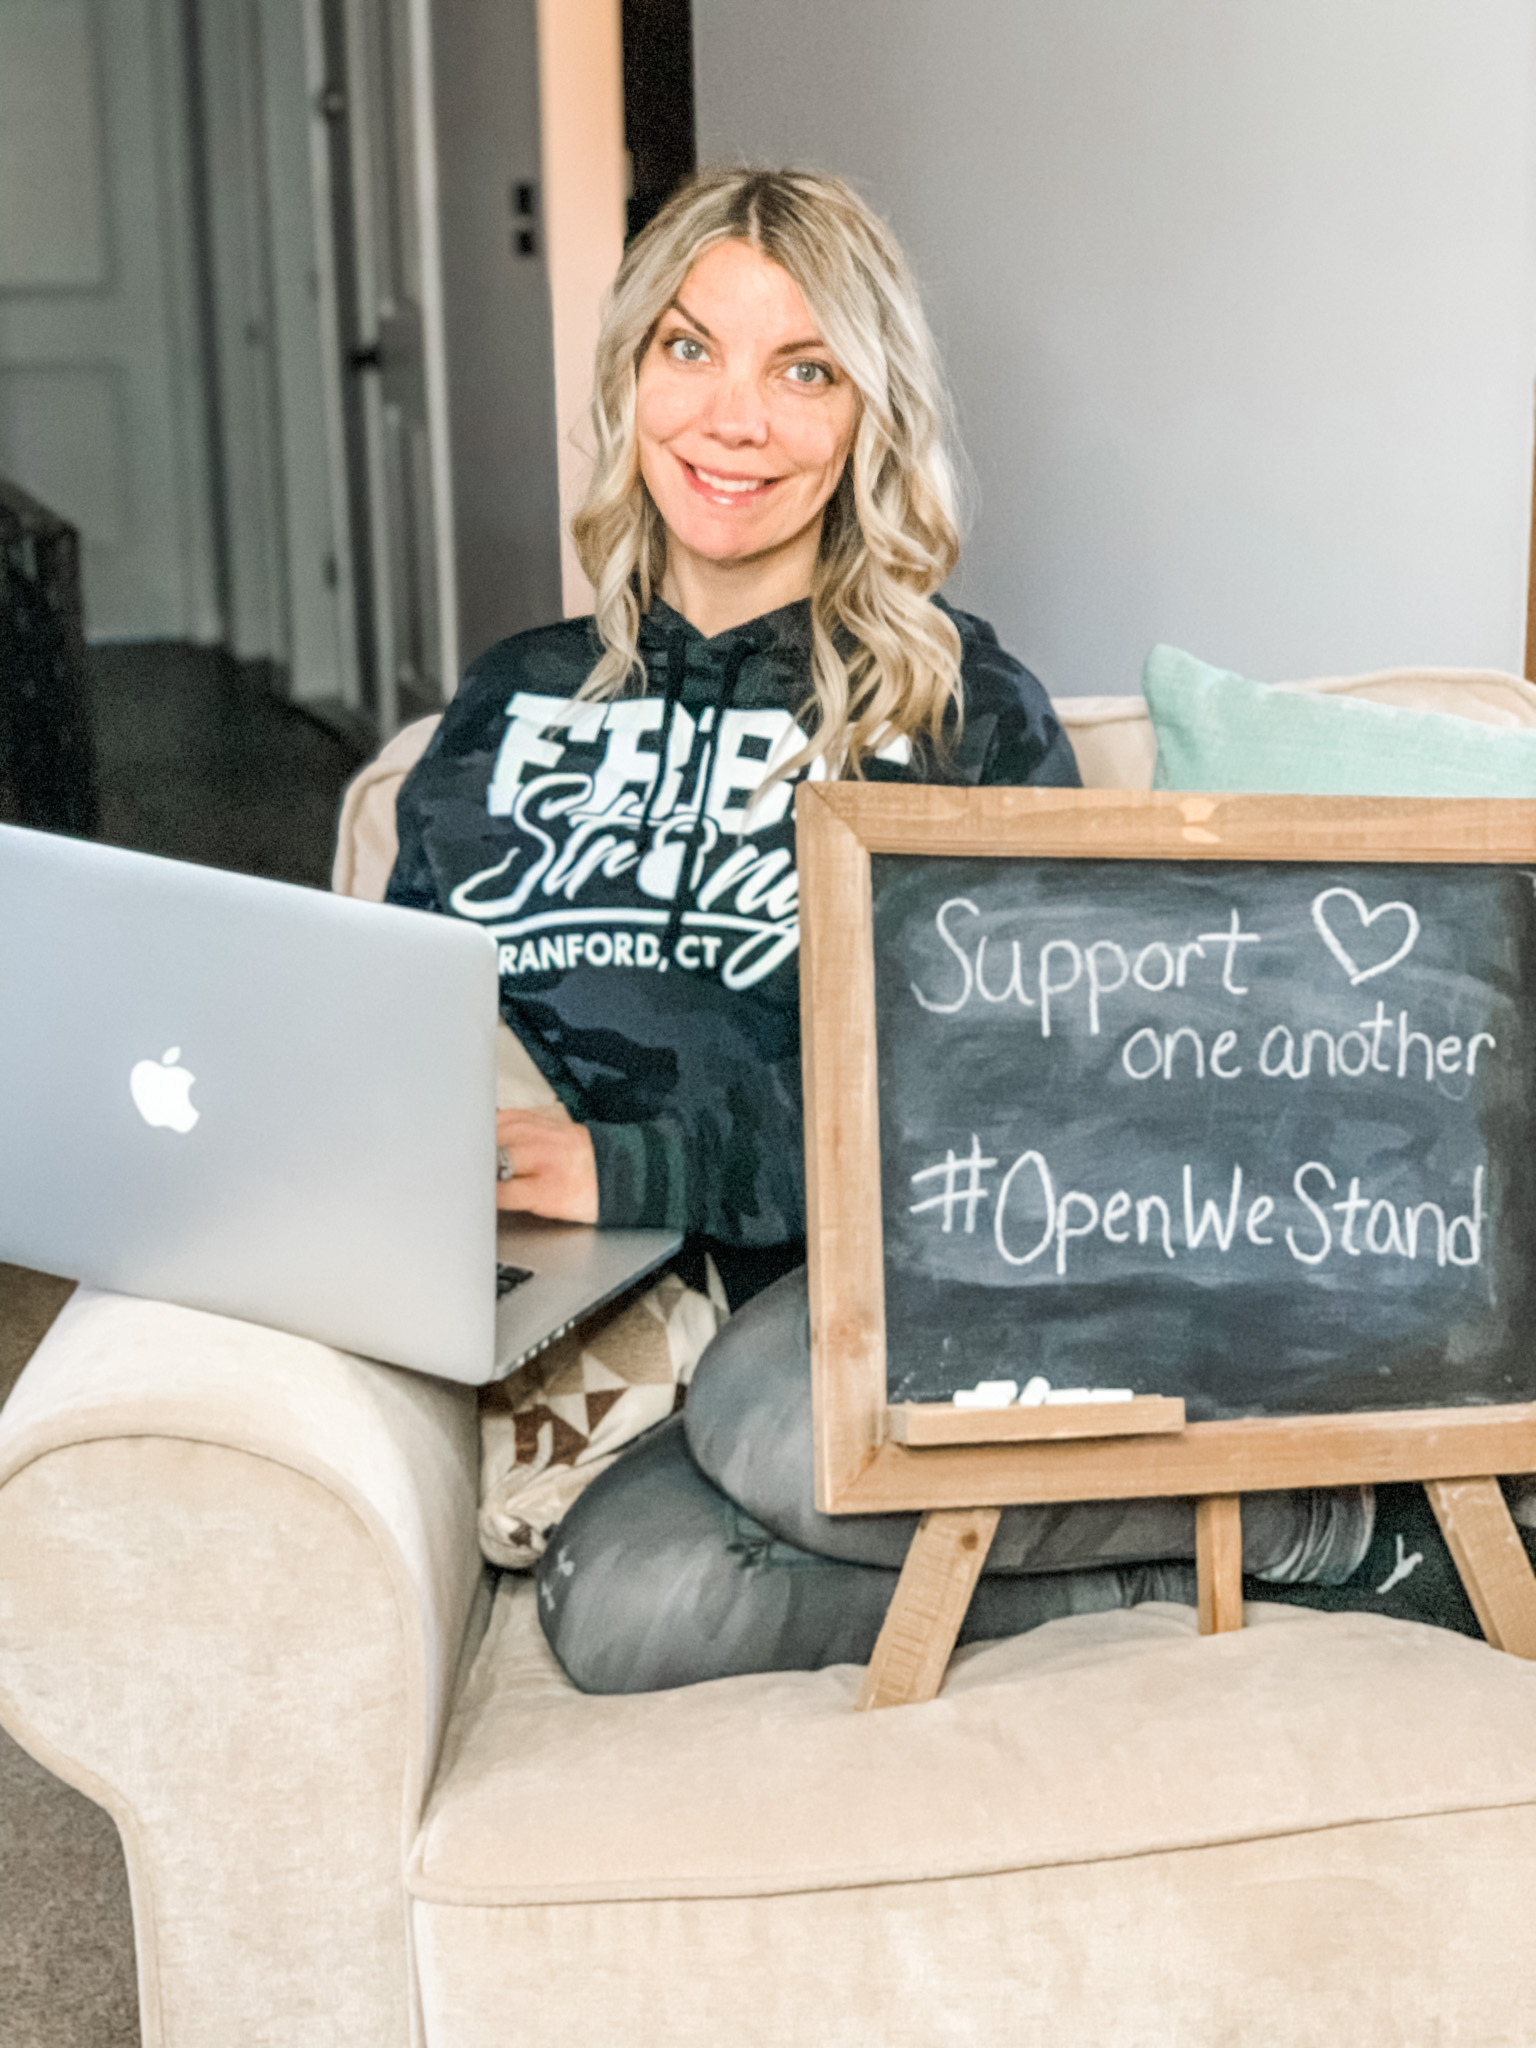 Support Fellow Small Business Owner Entrepreneurs with GoDaddy’s Microsite #OpenWeStand